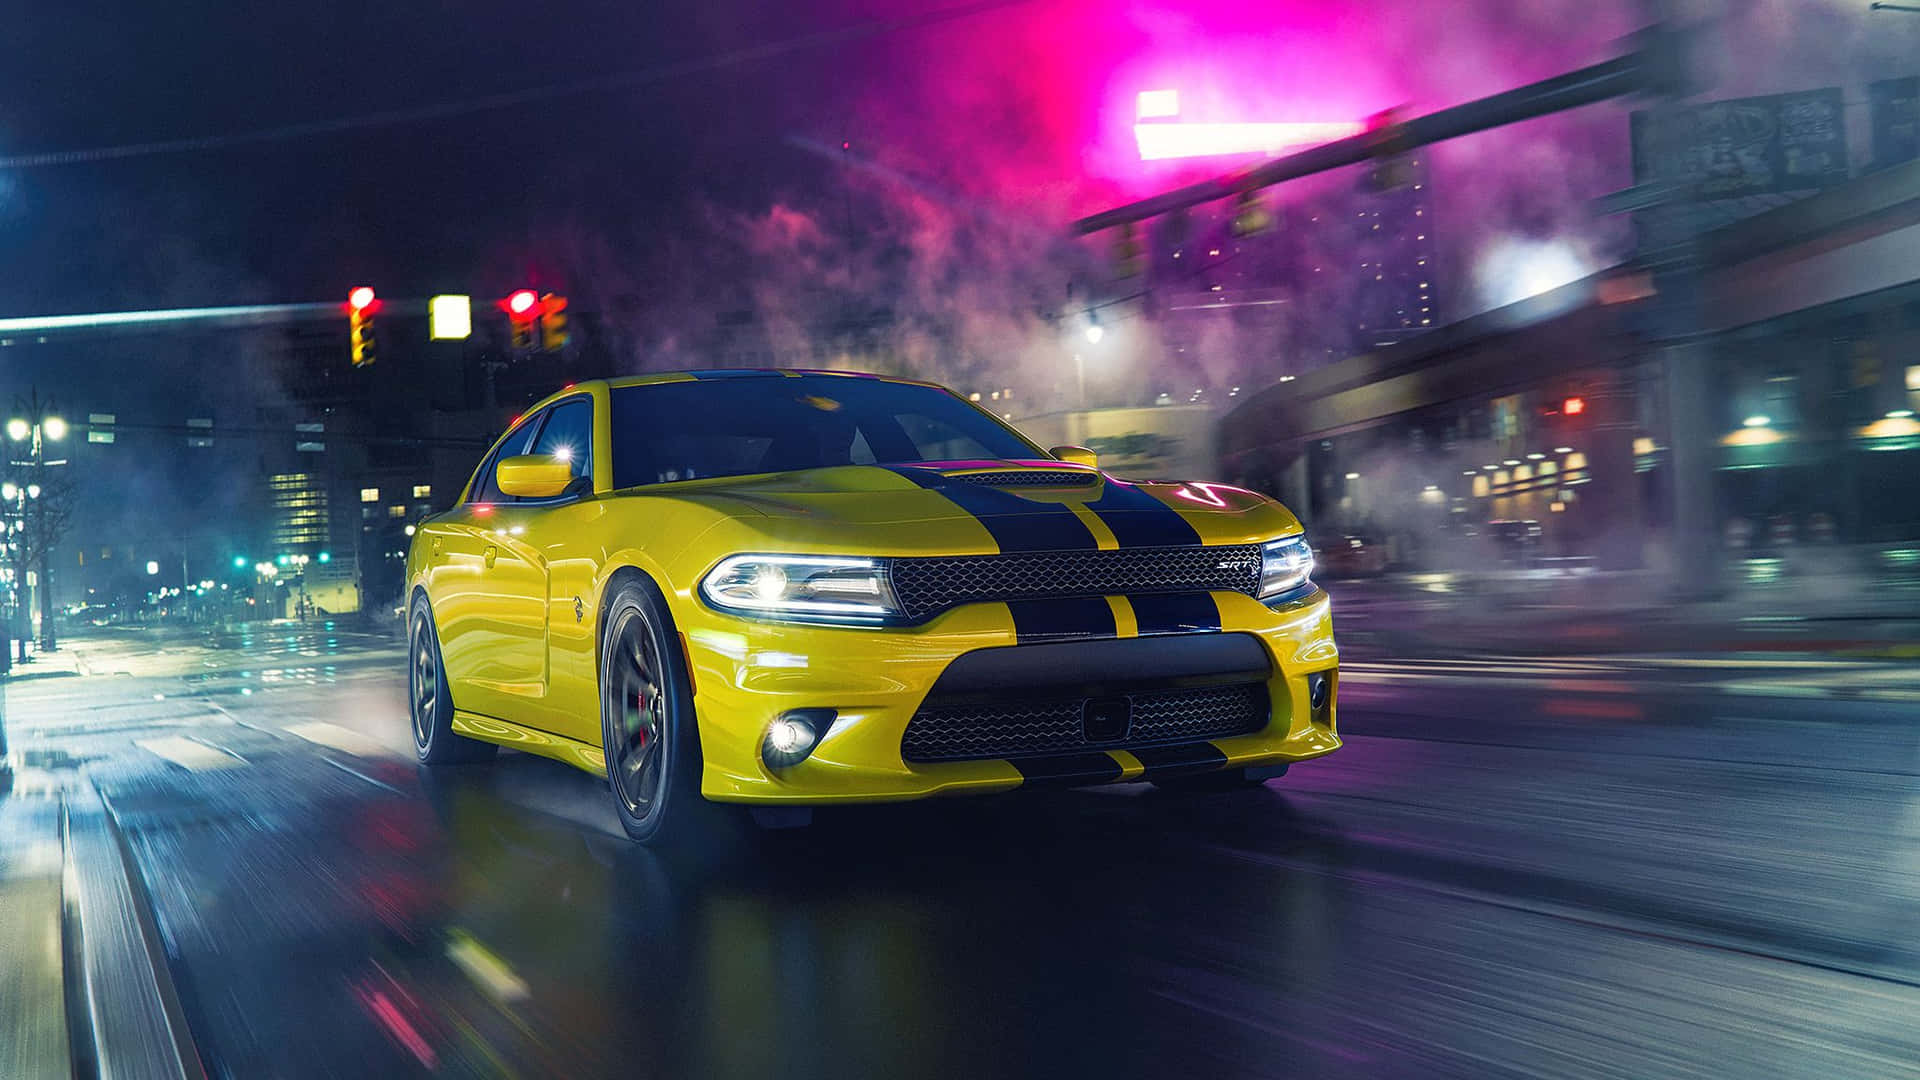 Sleek Dodge Charger Muscle Car in Action Wallpaper